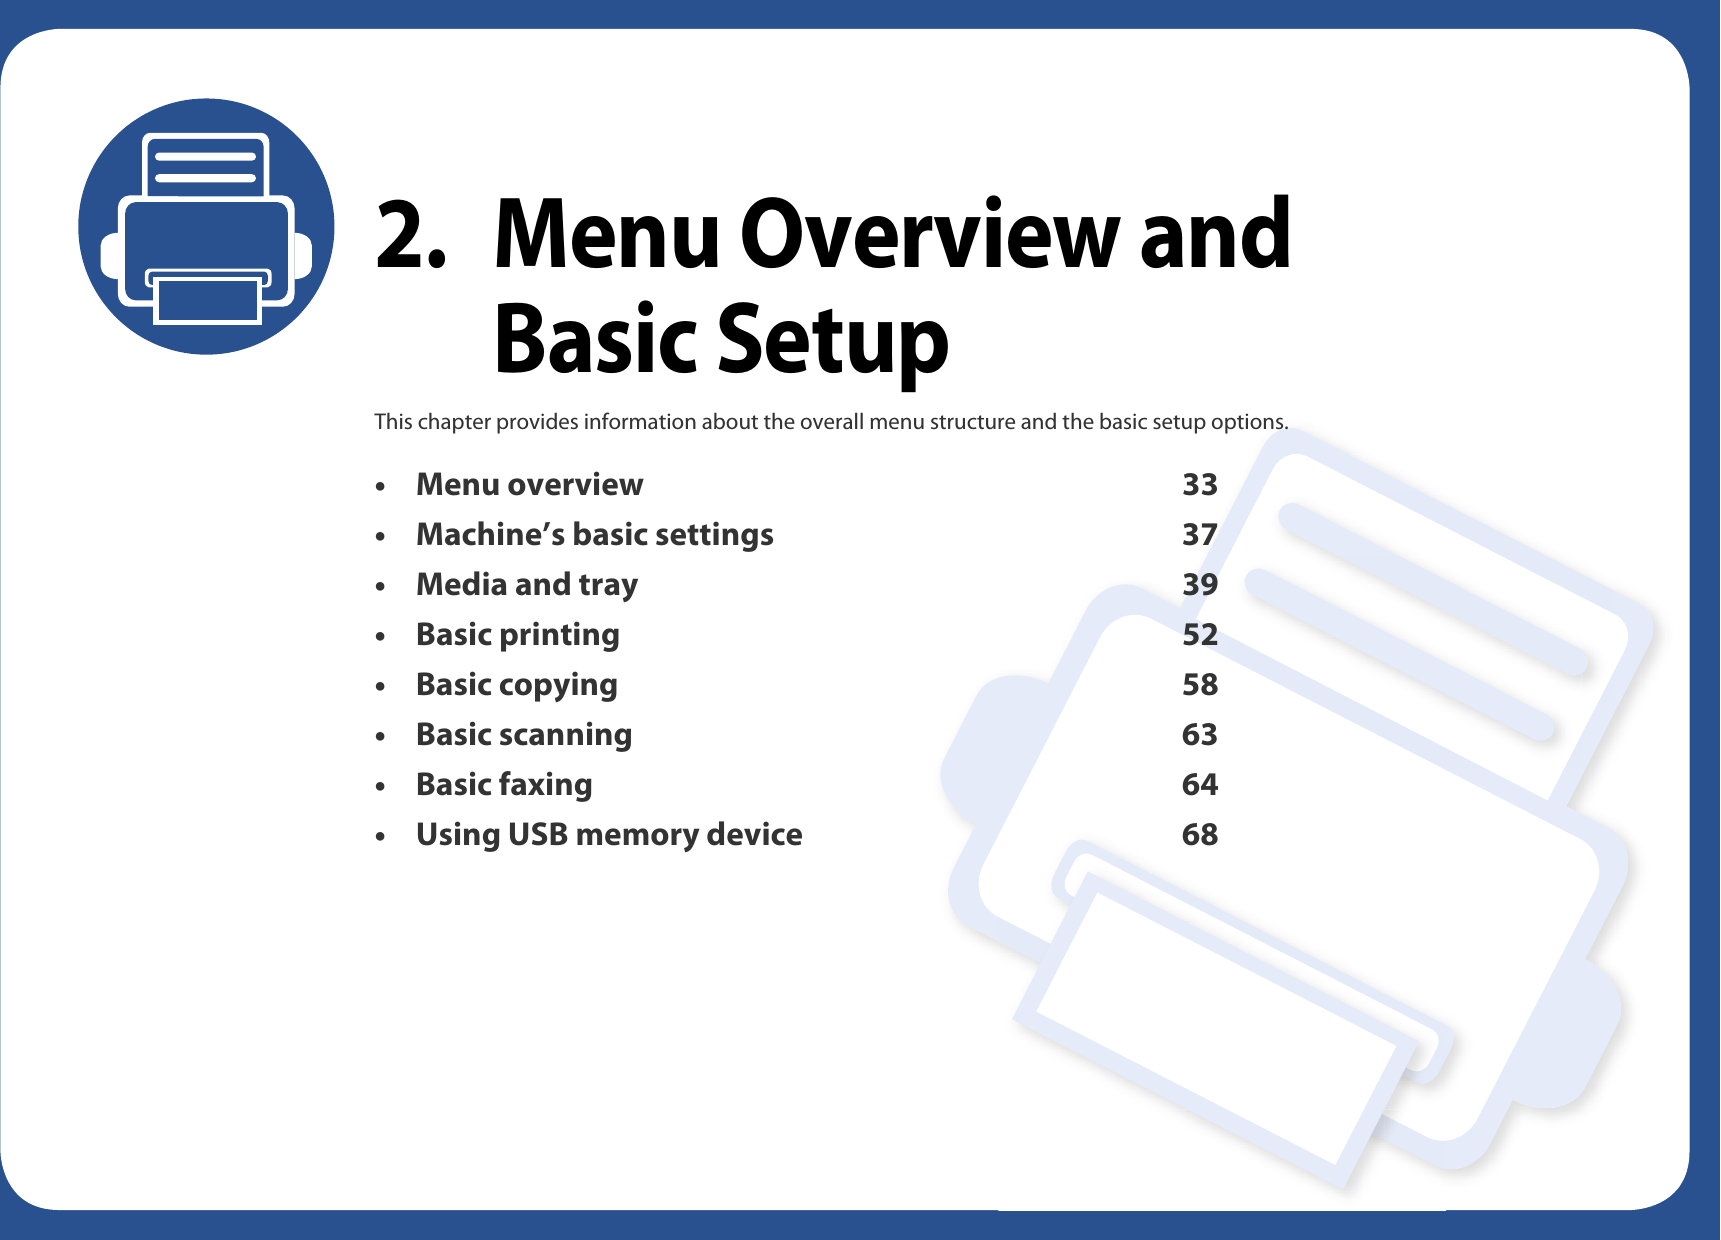 2. Menu Overview and Basic SetupThis chapter provides information about the overall menu structure and the basic setup options.• Menu overview 33• Machine’s basic settings 37• Media and tray 39• Basic printing 52• Basic copying 58• Basic scanning 63• Basic faxing 64• Using USB memory device 68